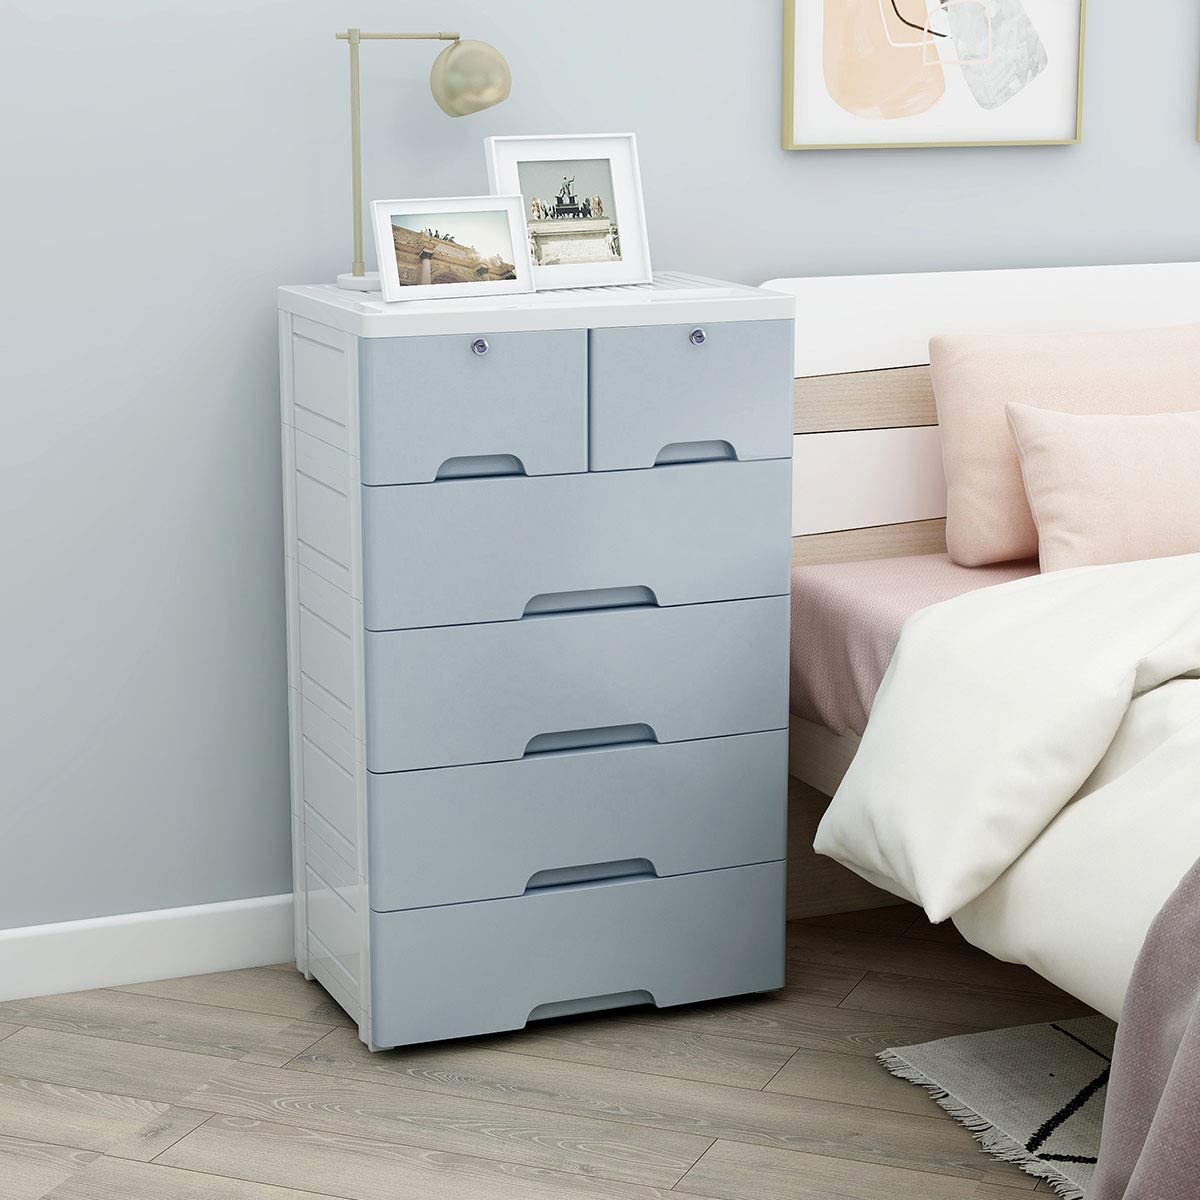 Hard Plastic Chest Drawers for Sale in kenya – Dazzling Decor